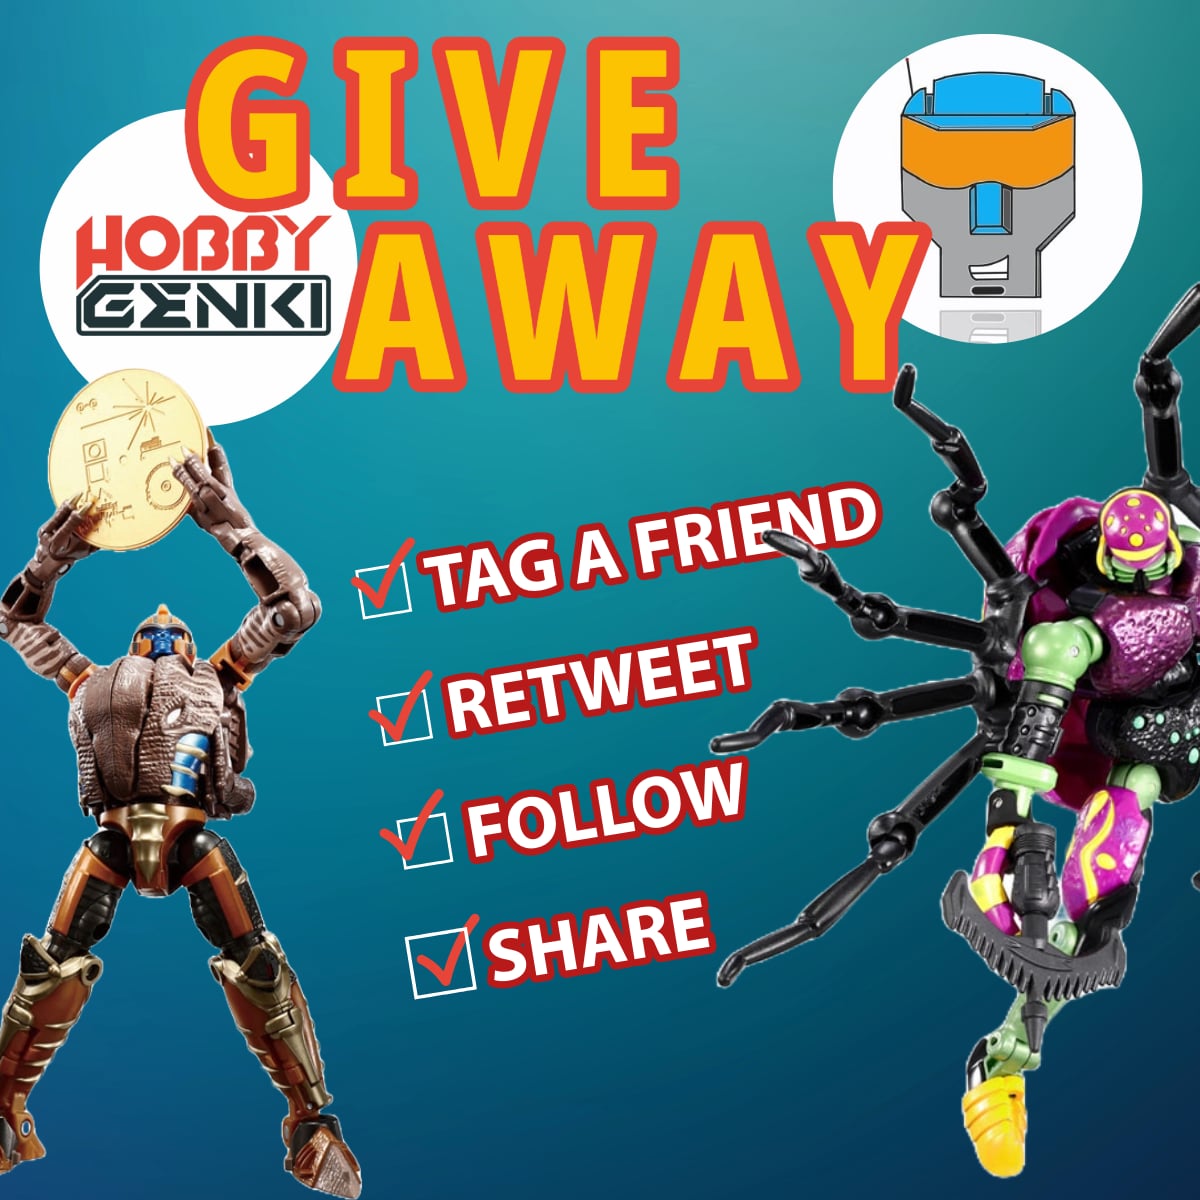 So @HobbyGenki and I are doing a GIVEAWAY on the TRANSFORMER SHOWDOWN OF TREACHERY set. All you have to do is Retweet, follow, share, and tag a friend! This will last till for one week (Sat the 25th), and then Hobby Genki will pick a winner!! This giveaway is worldwide!!